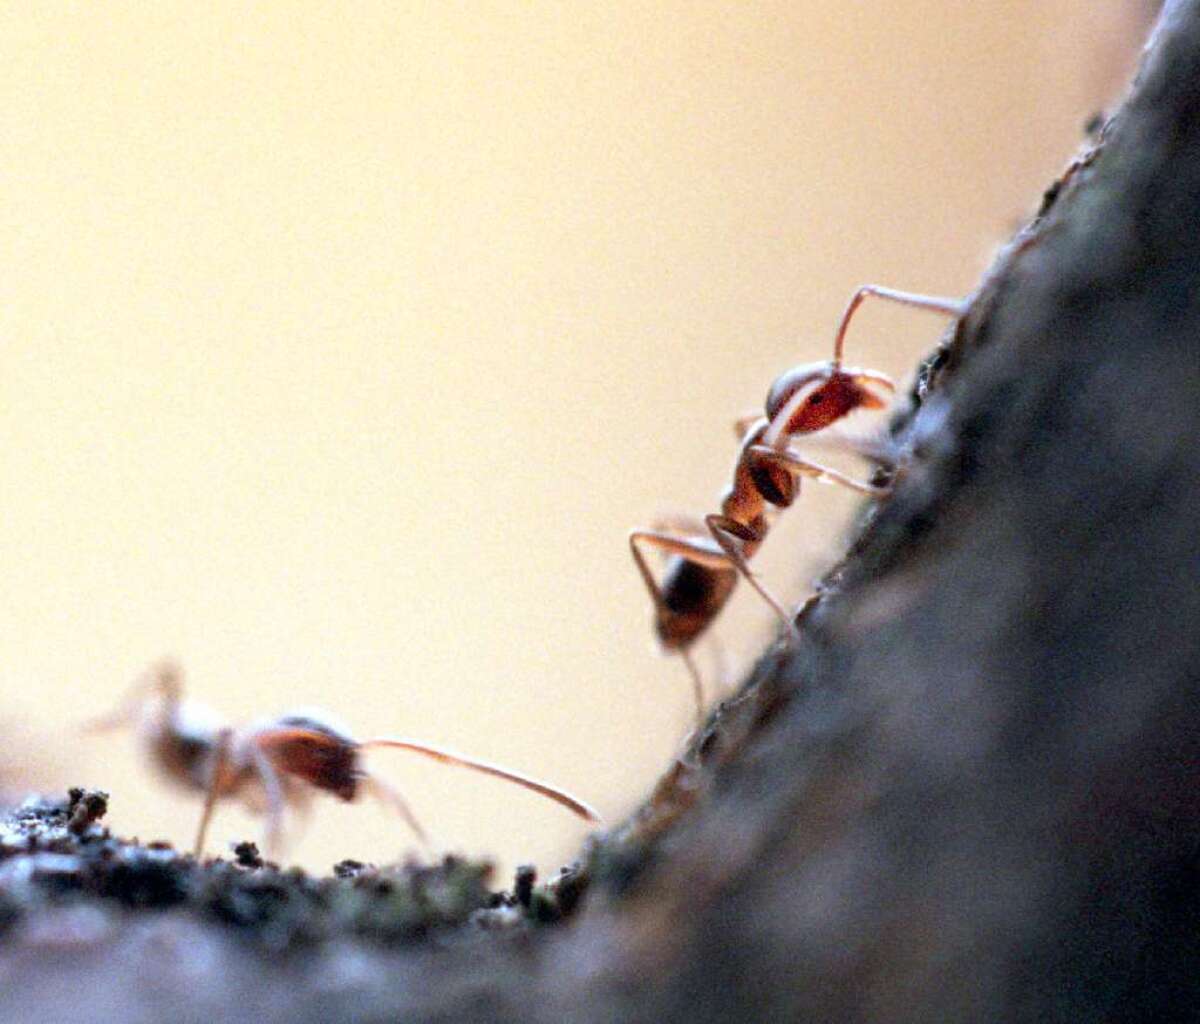 In drier climates, the Cordia alliodora tree tempts Azteca pittieri ants with more sap in order to recruit them to defend the tree against leaf-eating bugs, says a new study in PLOS Biology.